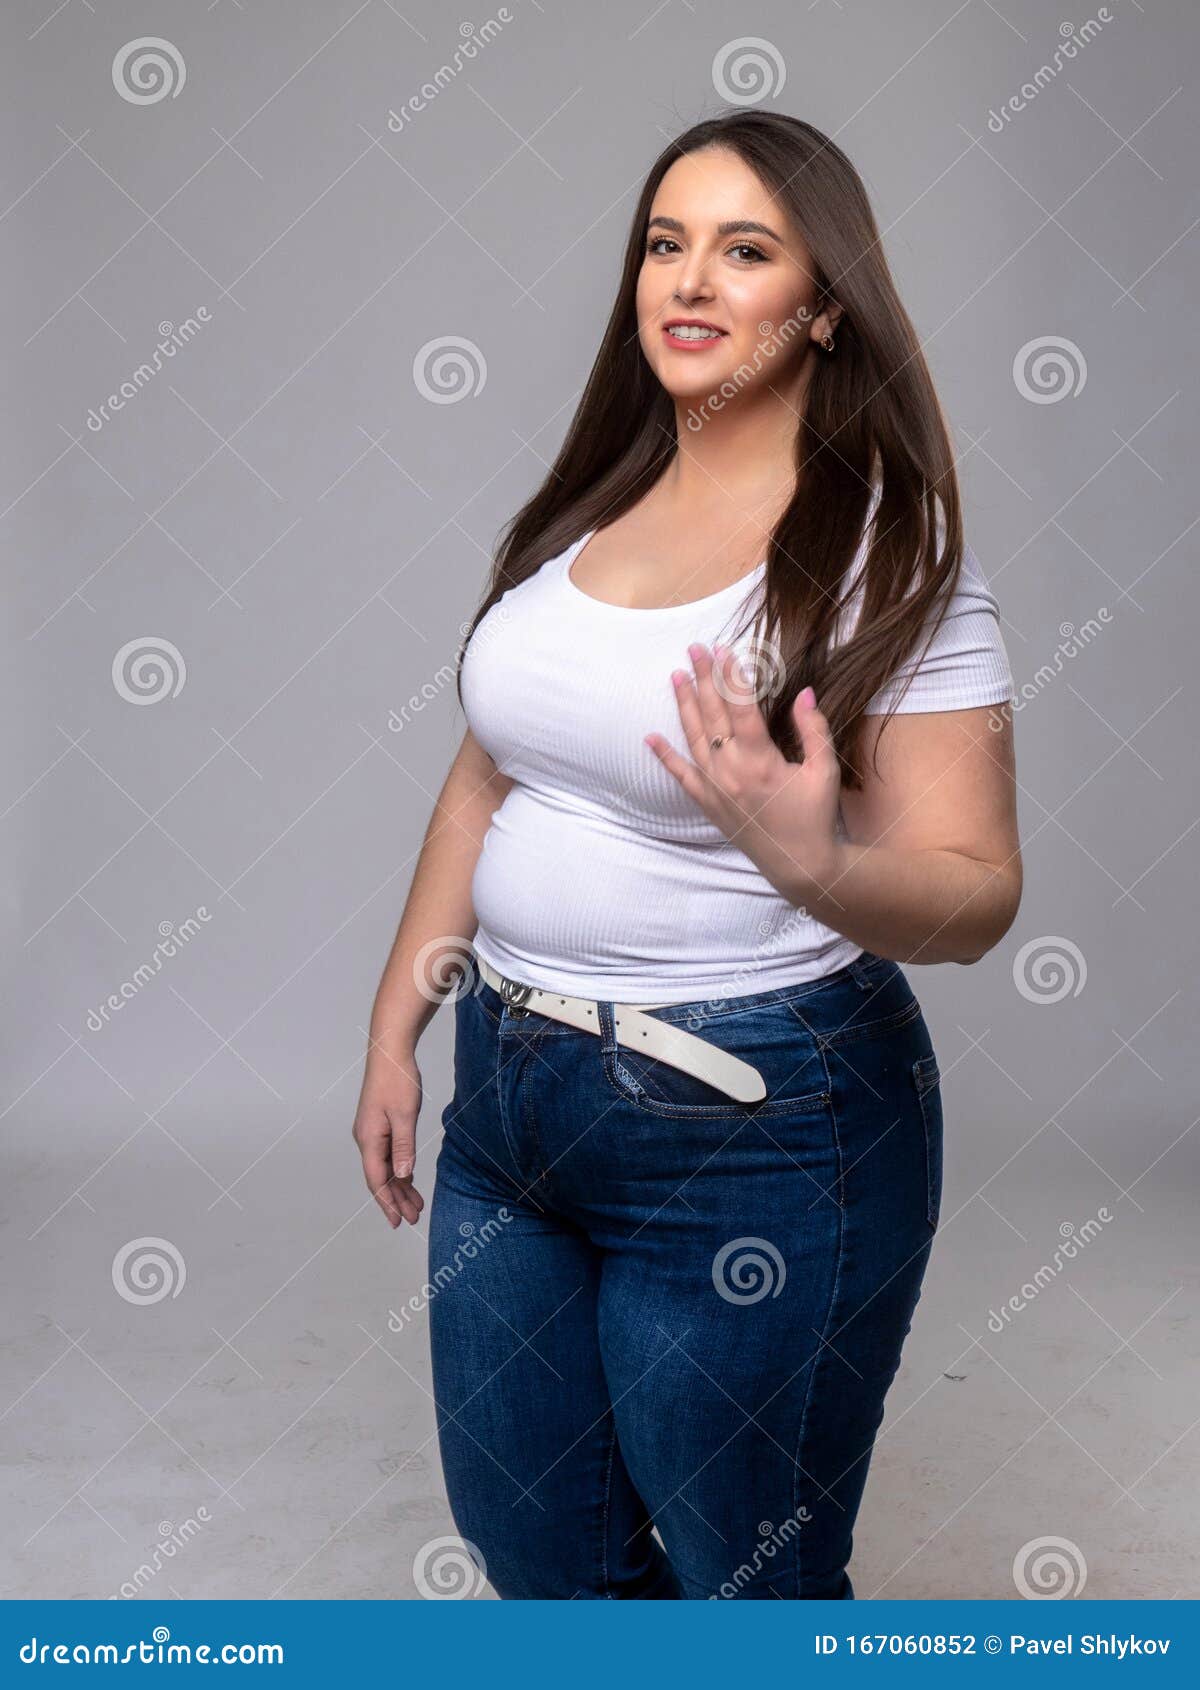 Plus Size Model with Long Hair in Studio Stock Photo - Image of young, 167060852